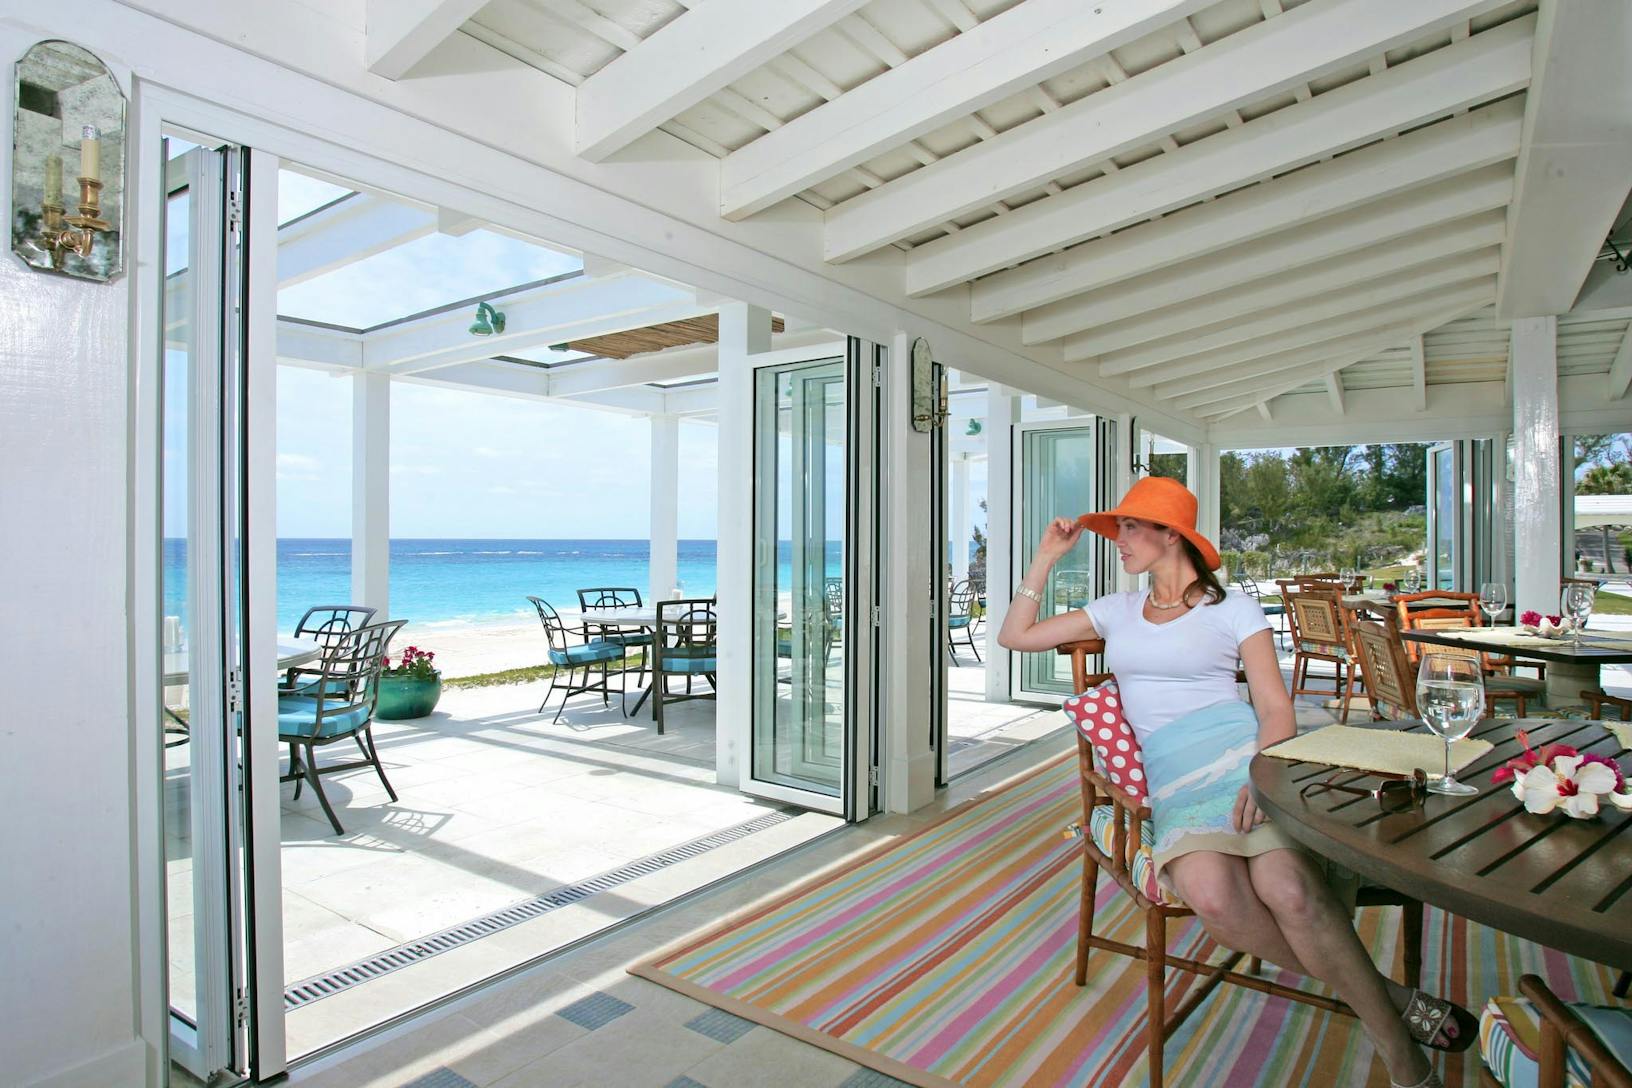 Extreme weather performance glass walls at Tuckers Point in Bermuda